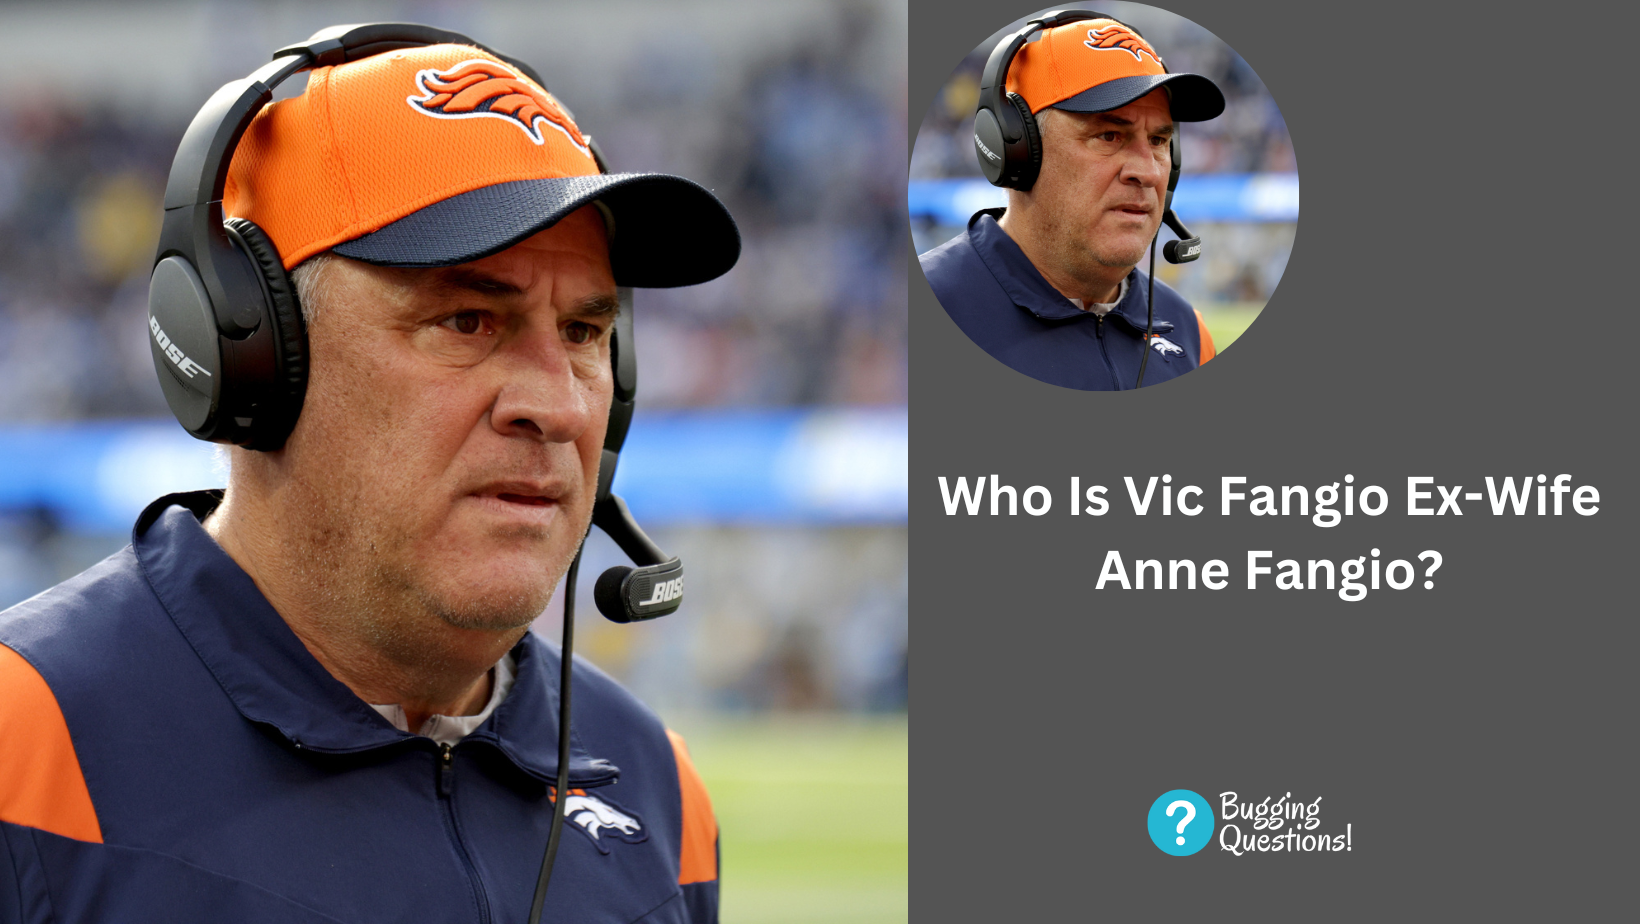 Who Is Vic Fangio Ex-Wife Anne Fangio?